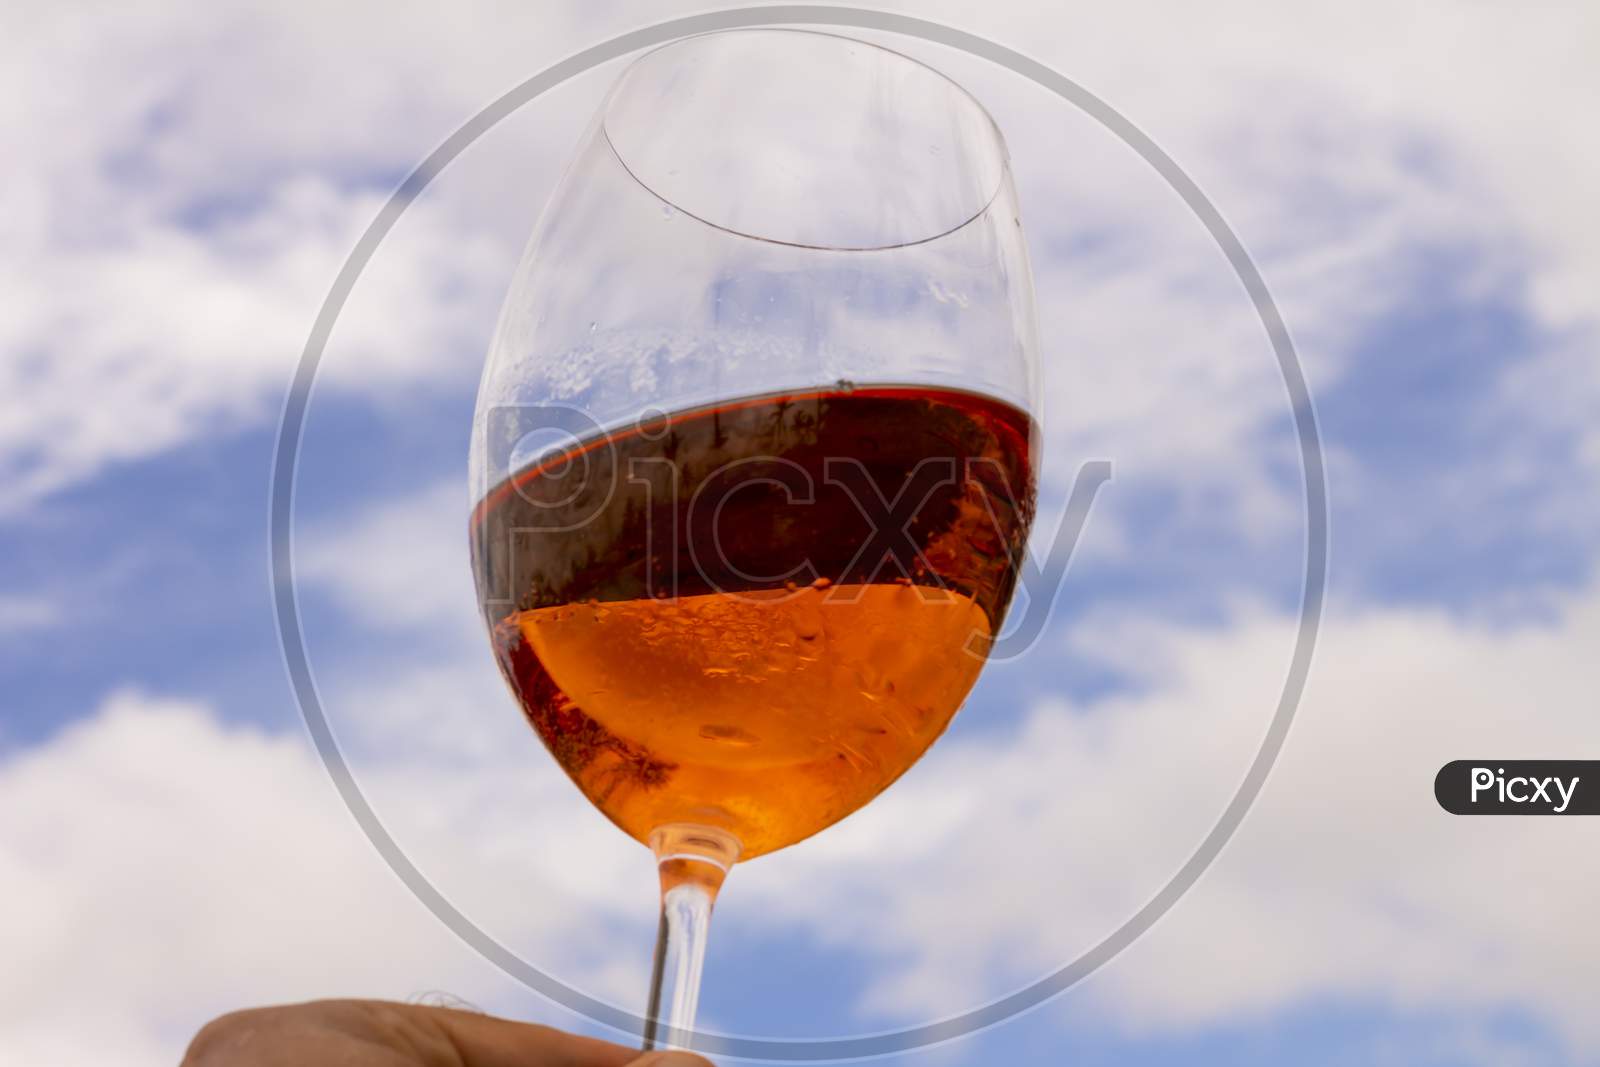 Crystal Glass With Fresh Rosé Wine For Making A Toast Raised To Heaven. Celebration Or Wealth Concept.